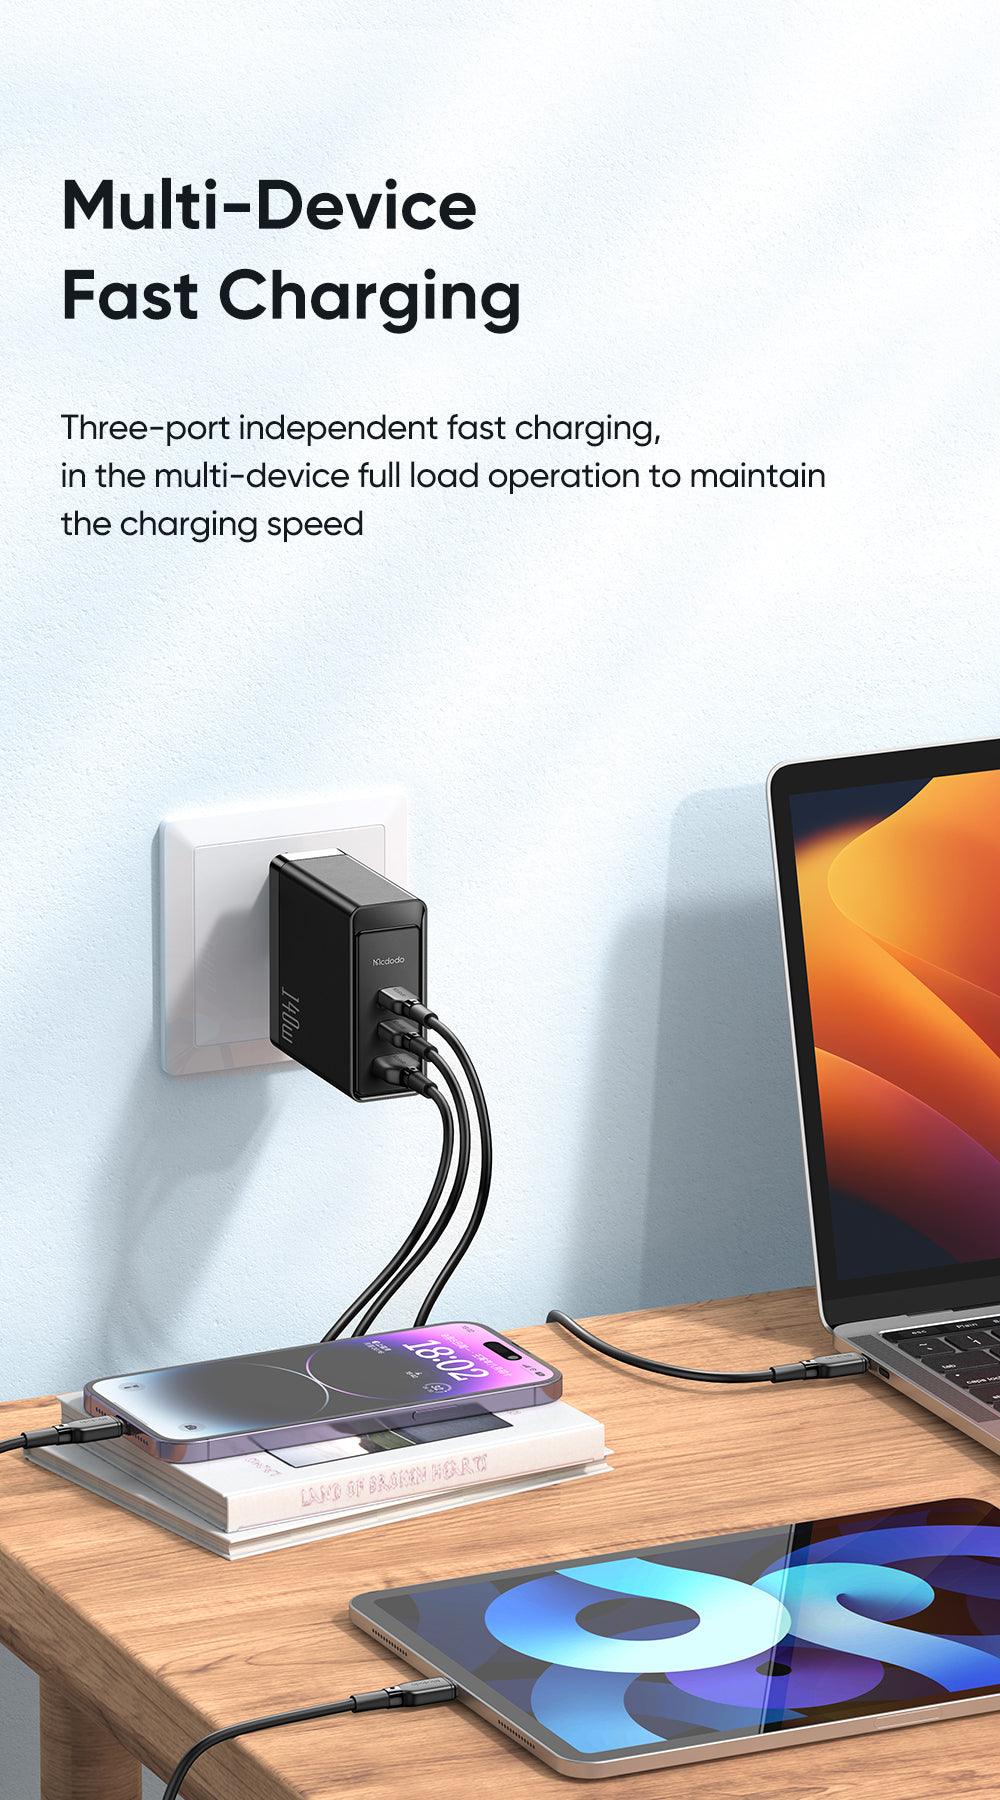 Mcdodo 140W GaN Charger - Dual Type-C + USB Fast Charger for iPhone and Android with Multiple Charging Protocols - Mcdodo Online